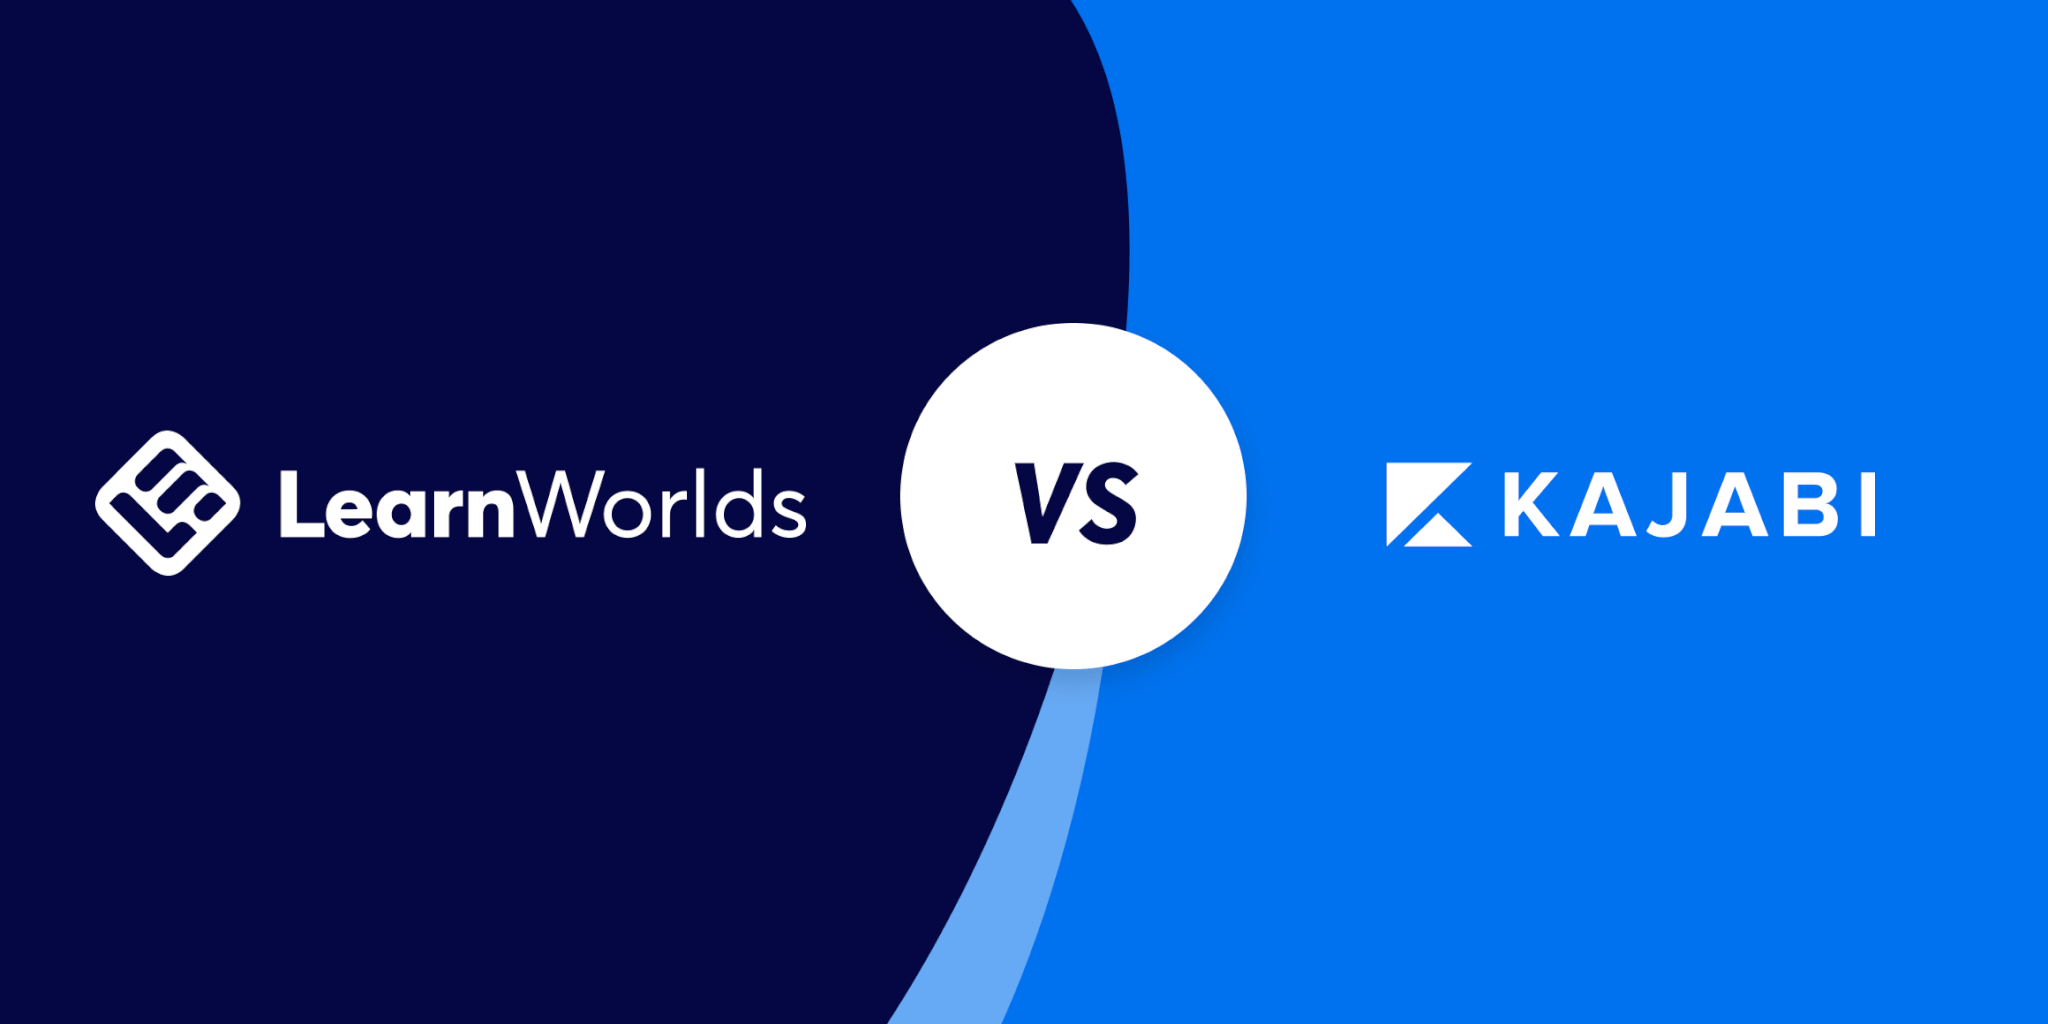 LearnWorlds vs Kajabi, which is the right course platform for you?